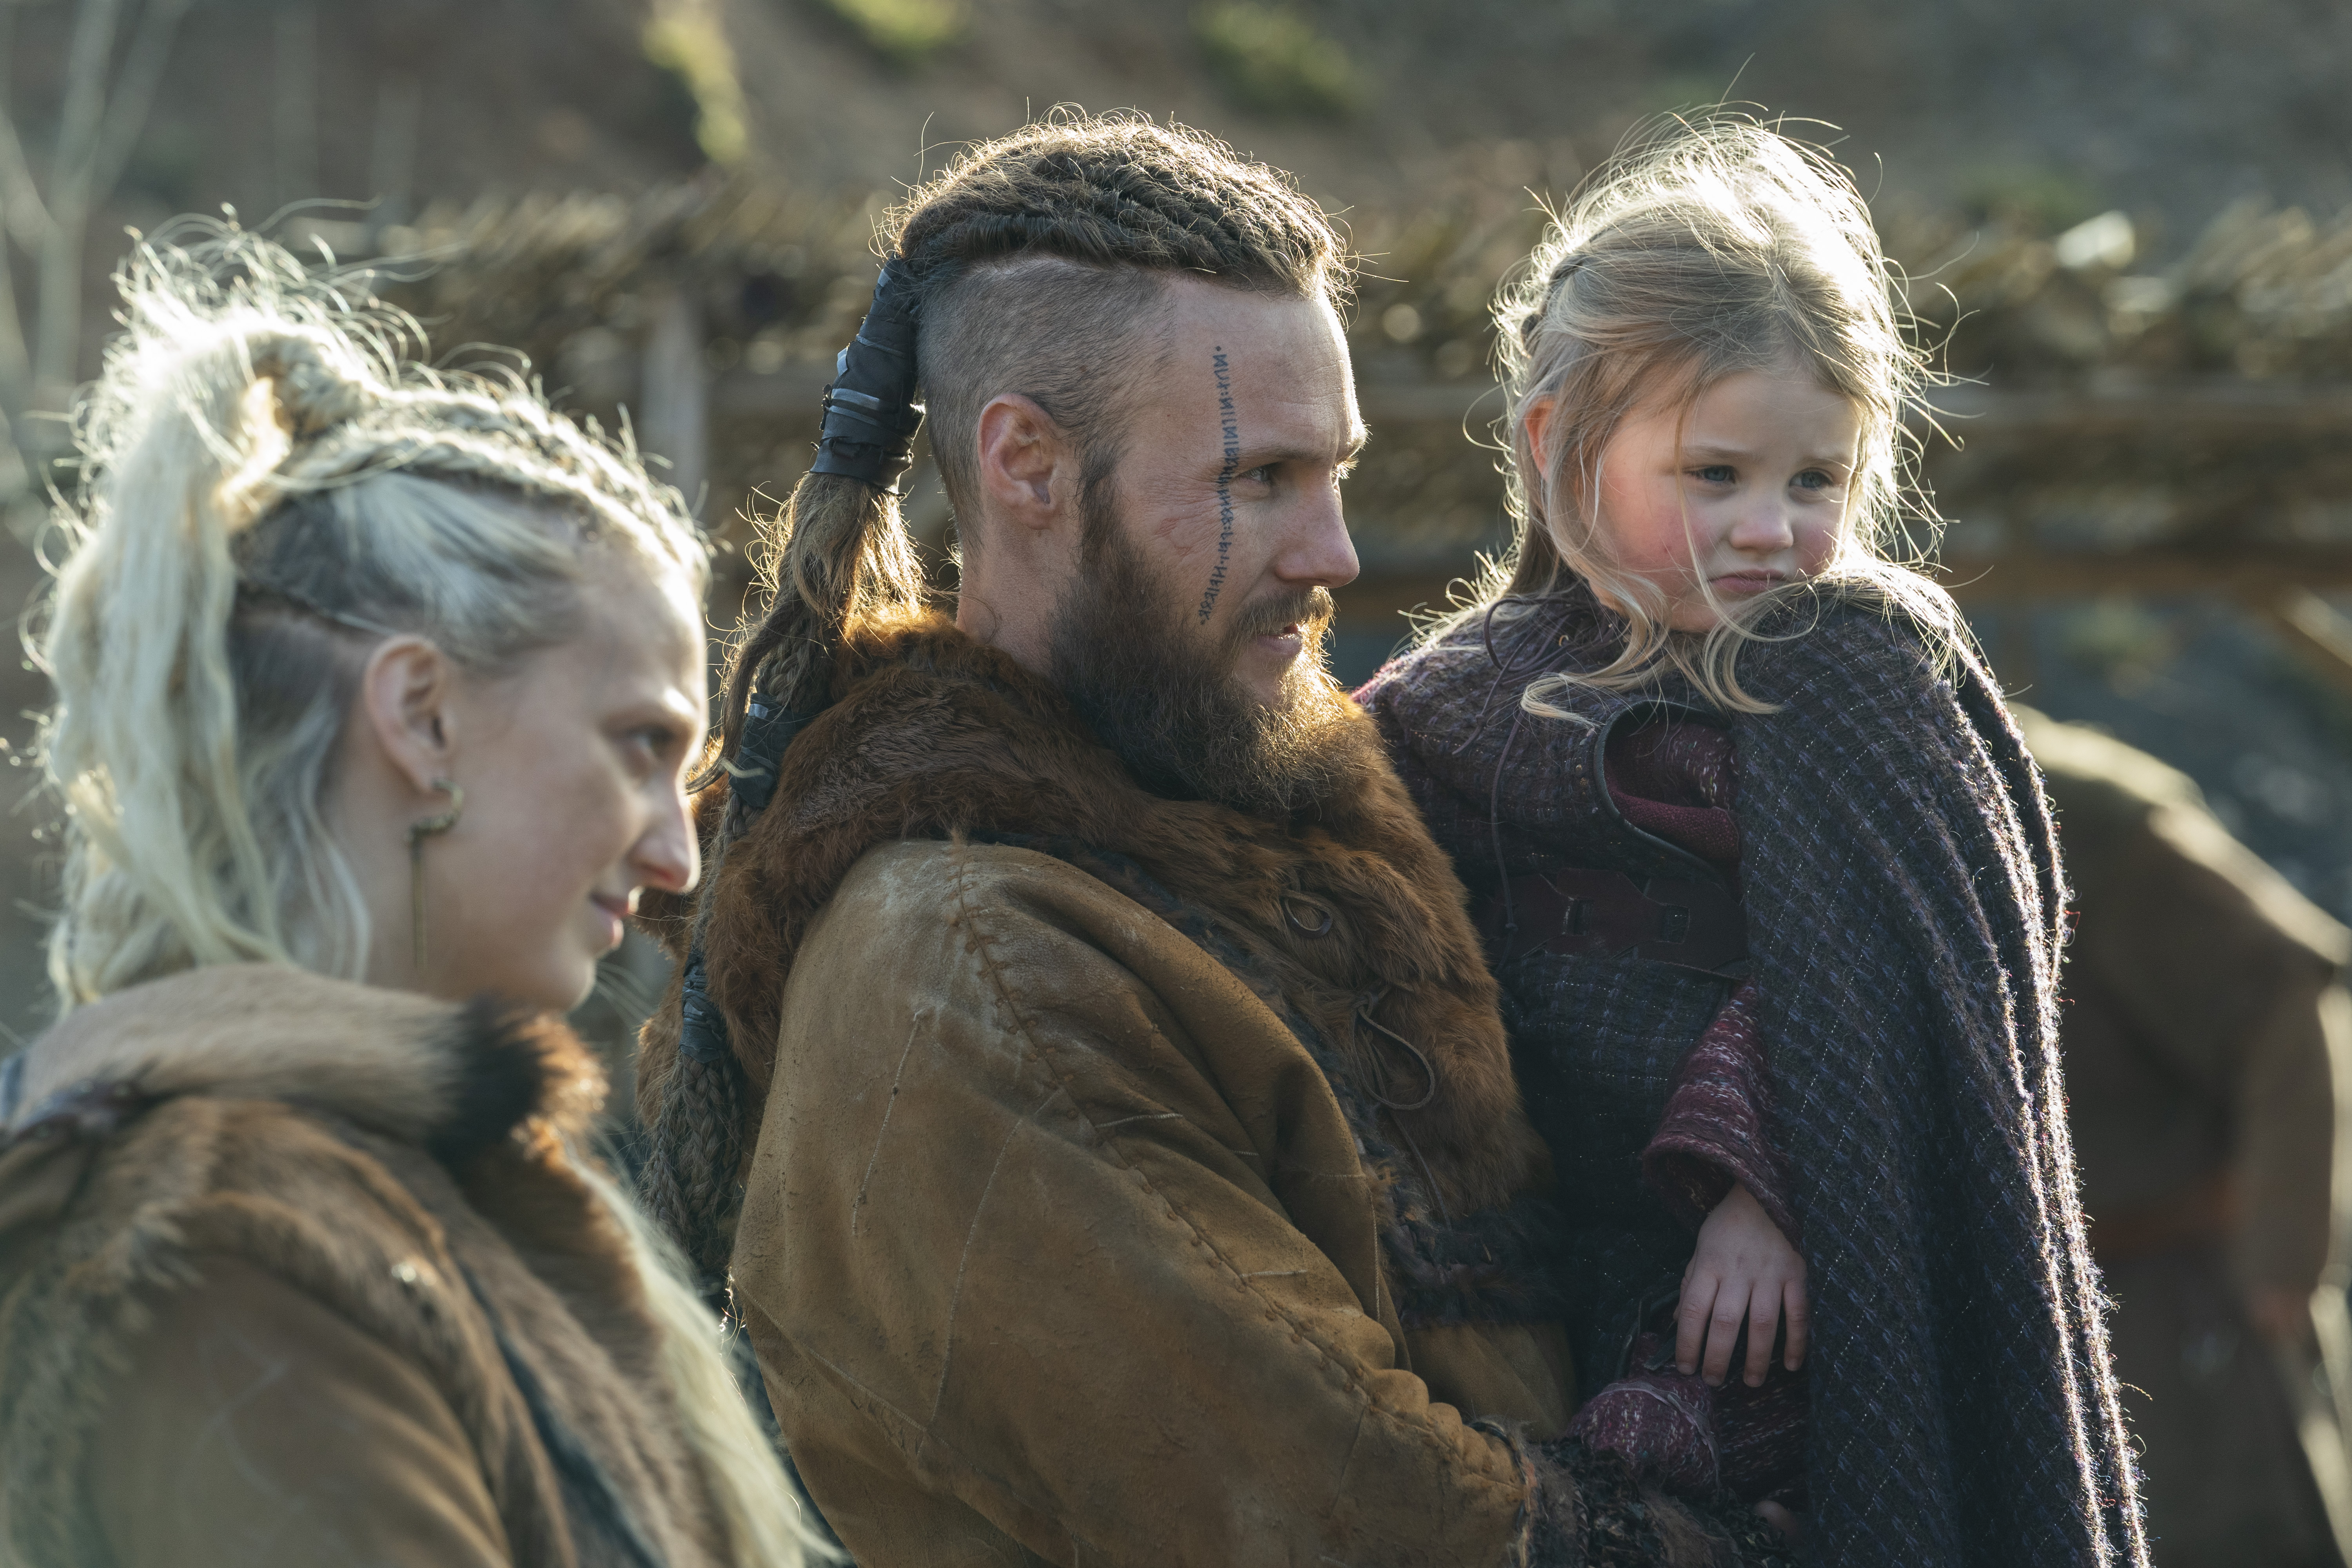 Get to know the starring roles of 'Vikings: Season 6 Vol. 1